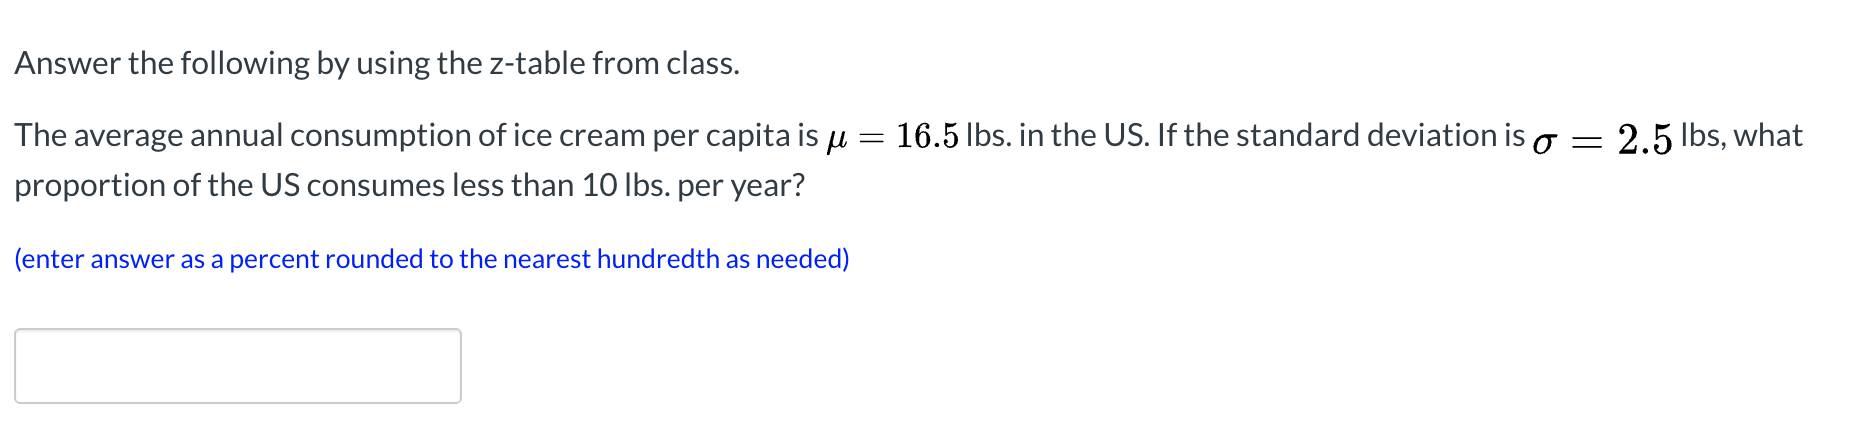 Answer the following by using the z-table from class.
The average annual consumption of ice cream per capita is u =
16.5 lbs. in the US. If the standard deviation is o = 2.5 Ibs, what
proportion of the US consumes less than 10 Ibs. per year?
(enter answer as a percent rounded to the nearest hundredth as needed)
